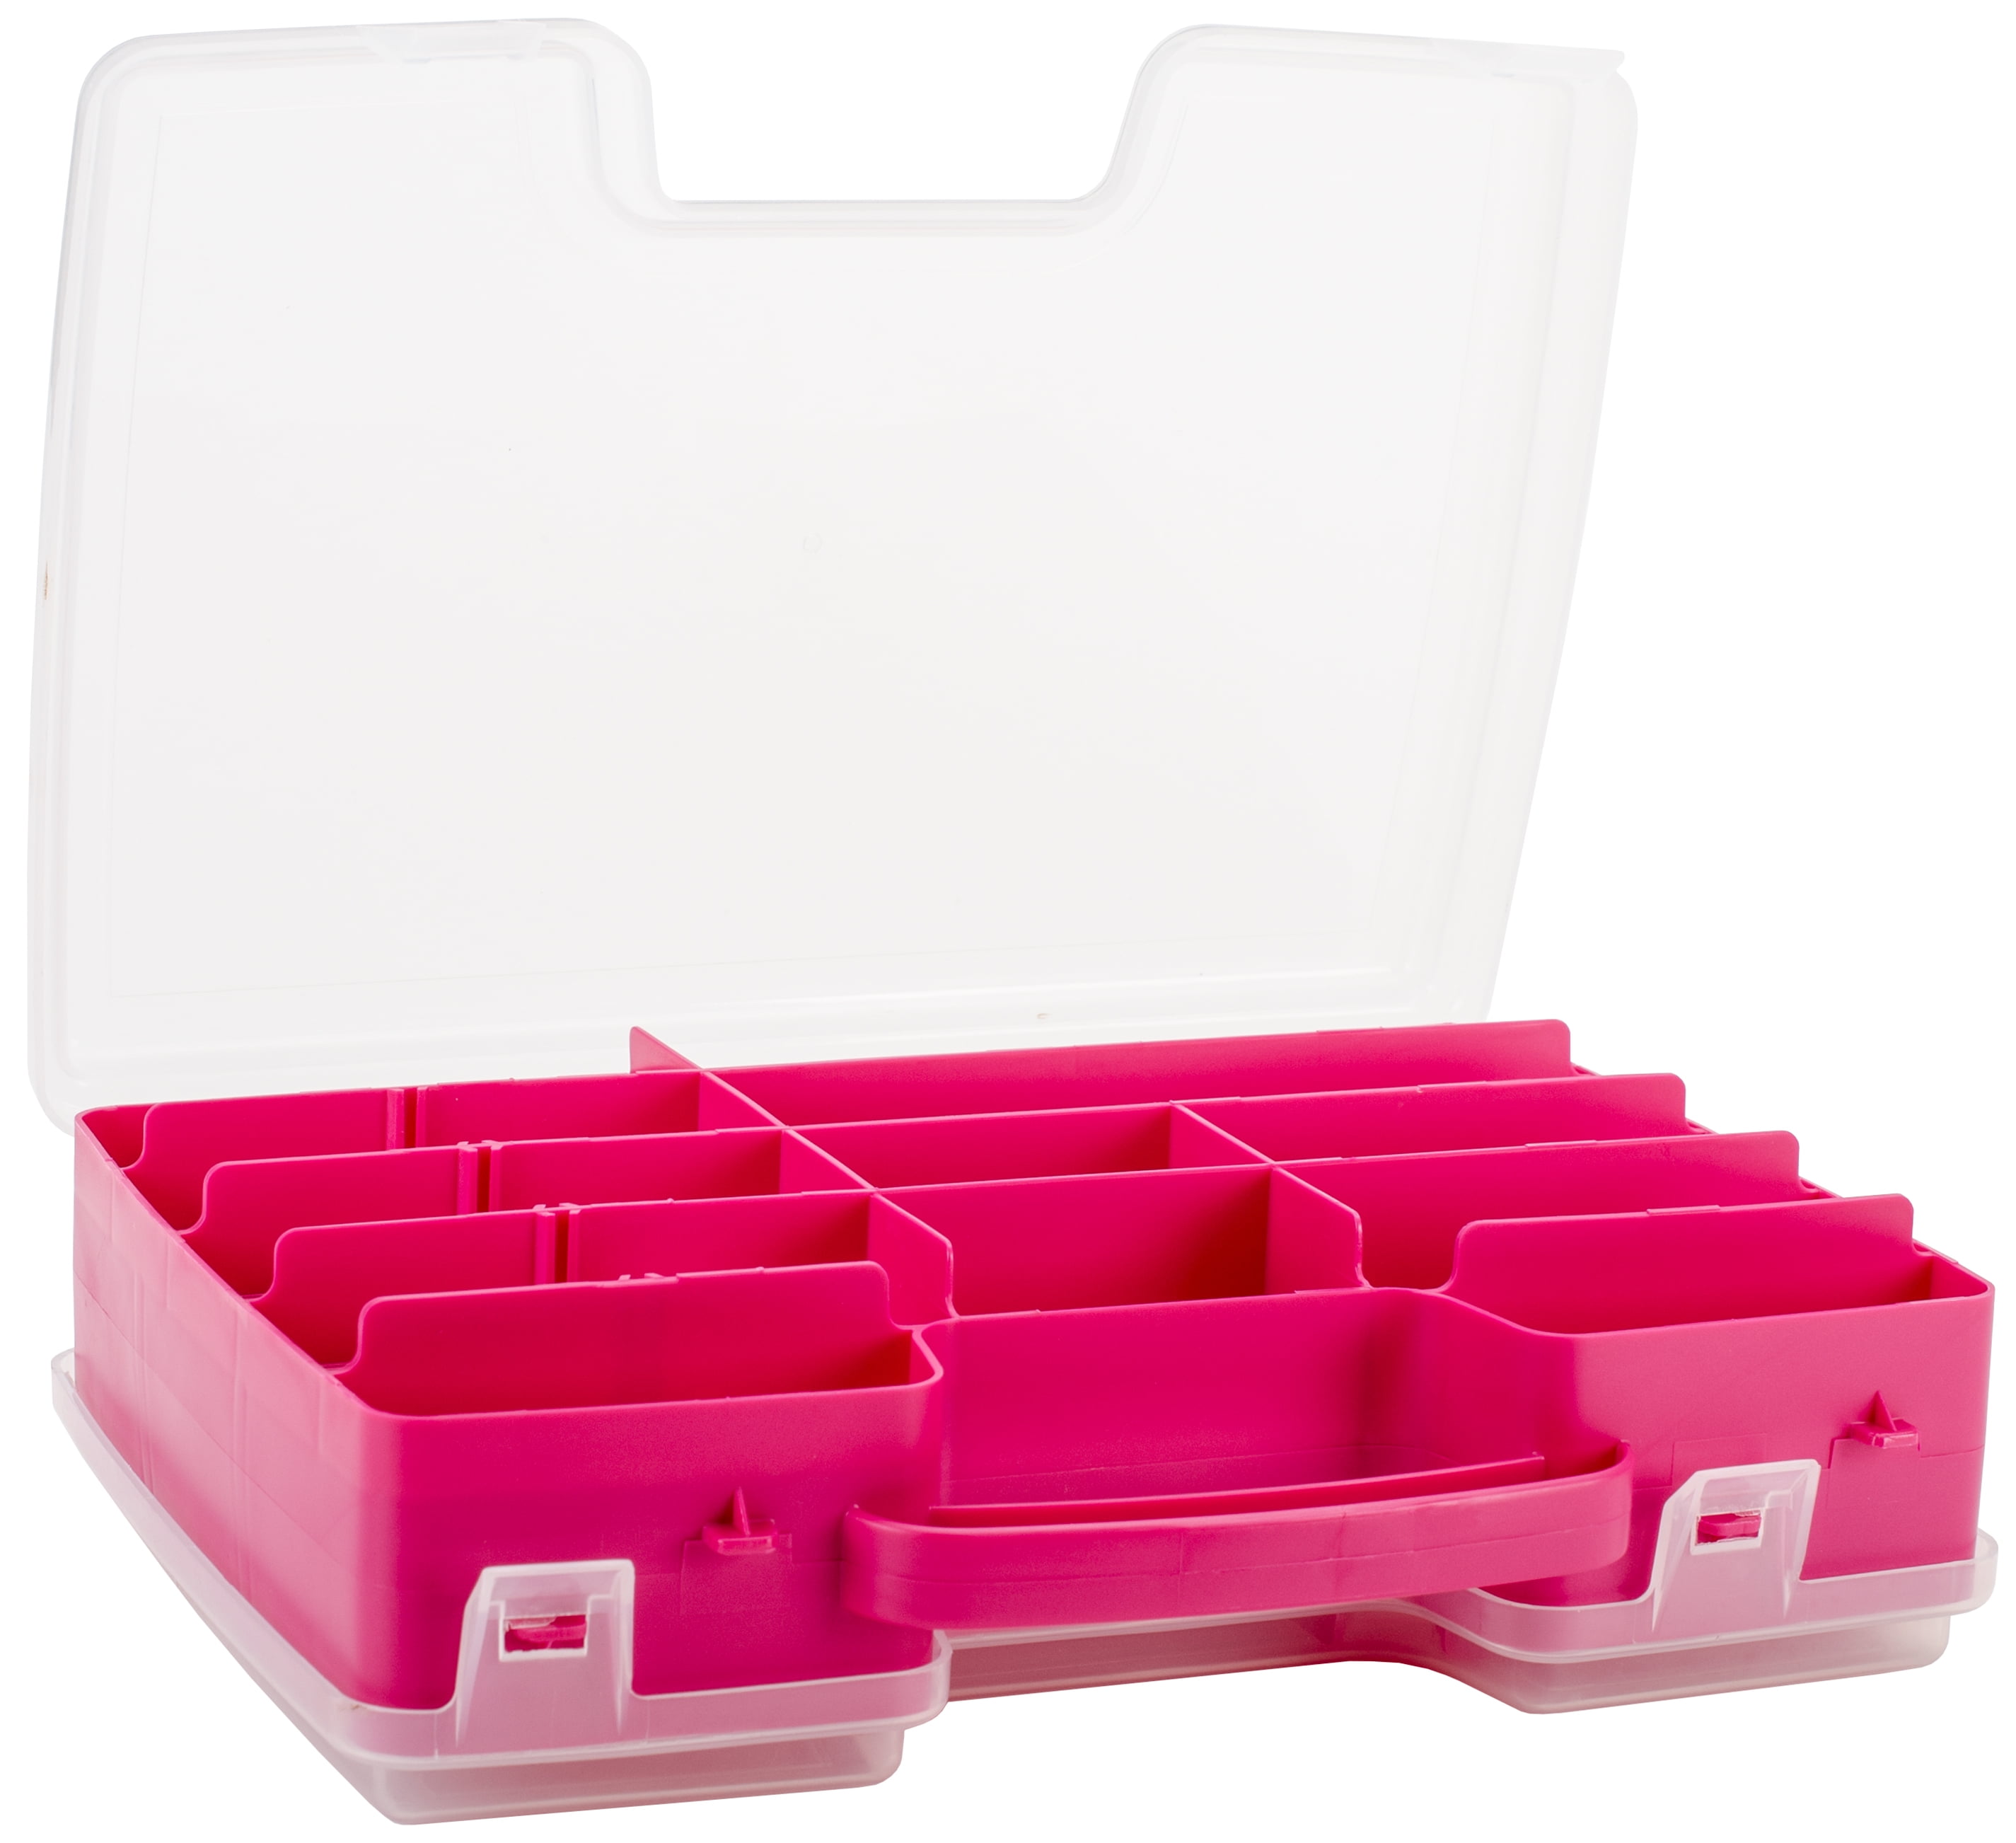 Creative options Pro Latch Utility Box 1-4 Compartments - 6X2.75X1.25 Clear W/Magenta